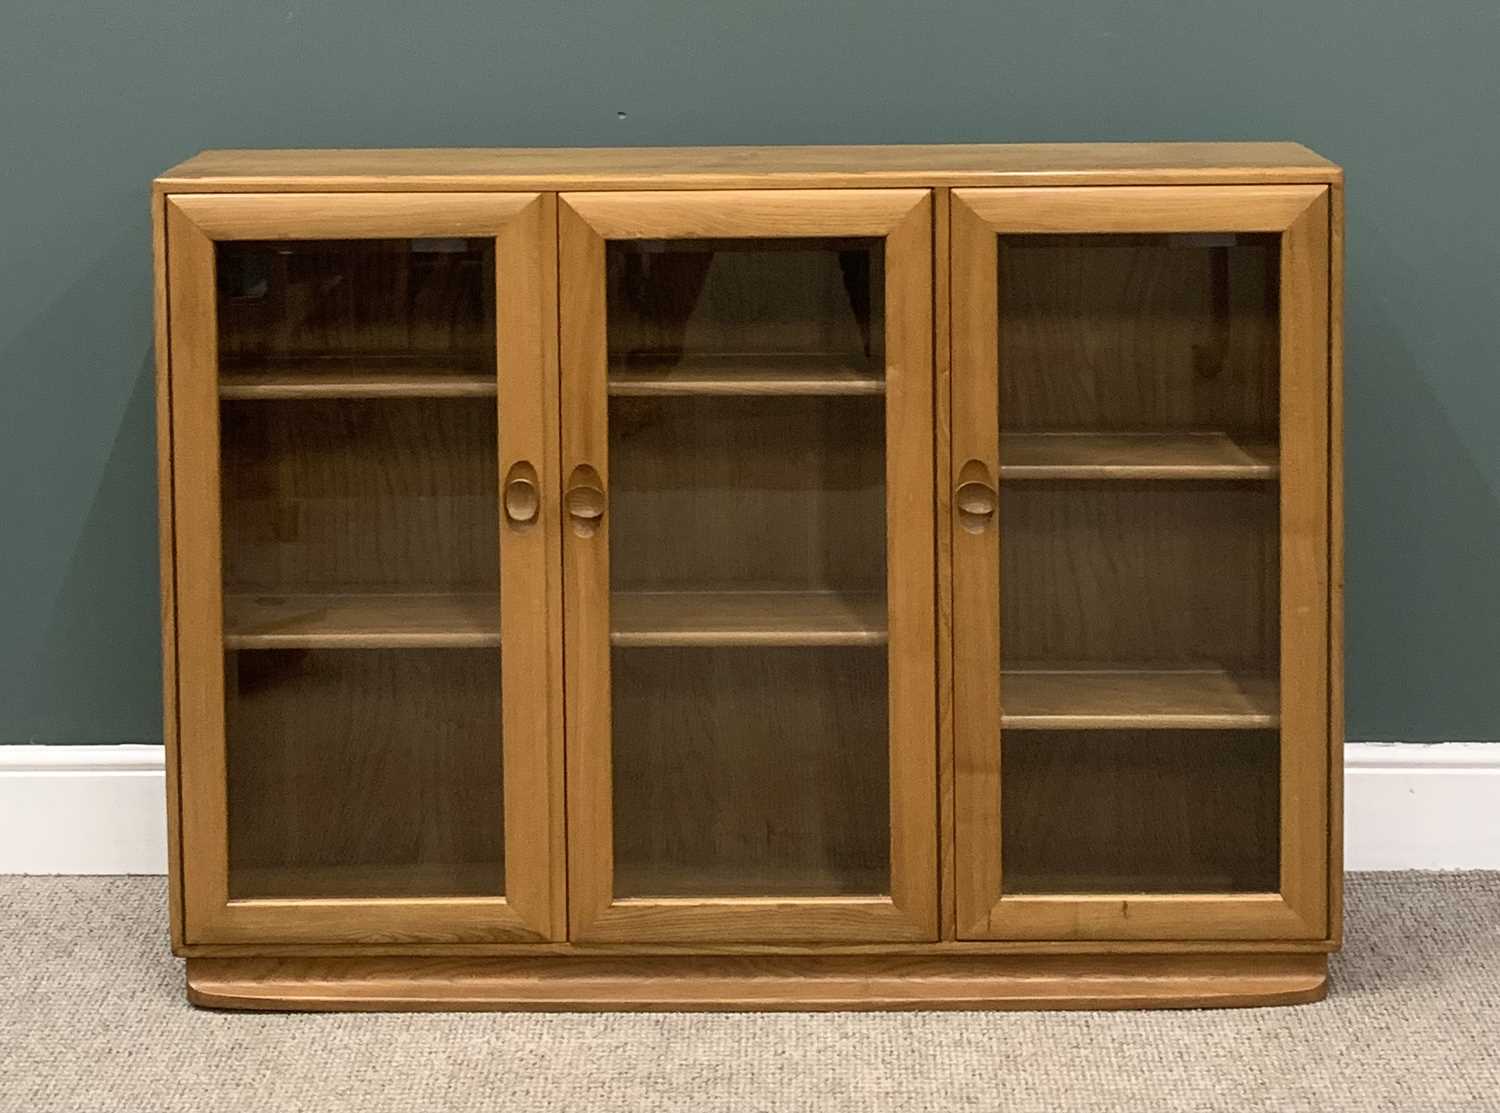 LIGHT ERCOL THREE DOOR BOOKCASE, 97 (h) x 136 (w) x 29 (d) cms Provenance: Private collection